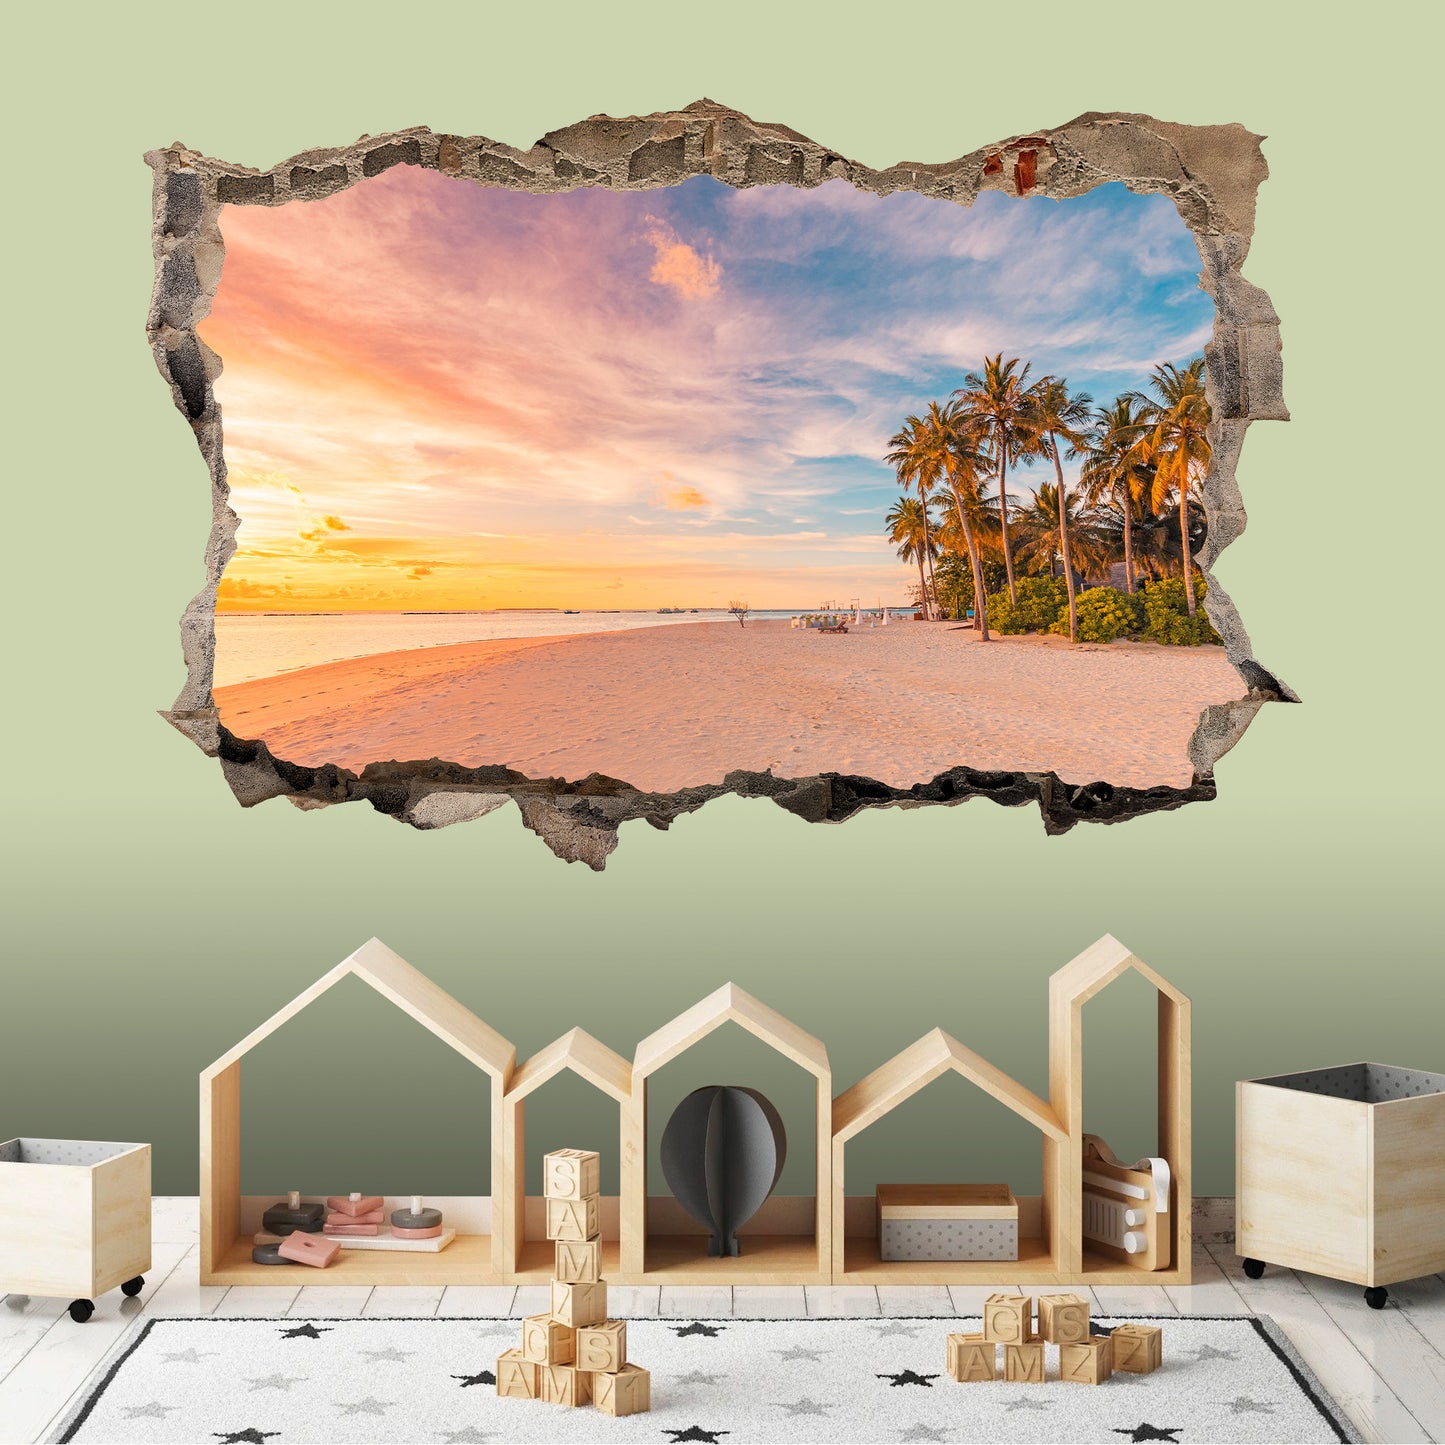 3D Ocean Sunset Wall Decal - Stunning Beach View Through Realistic Cracked Wall, Tropical Palm Trees, and Azure Seascape - BW015